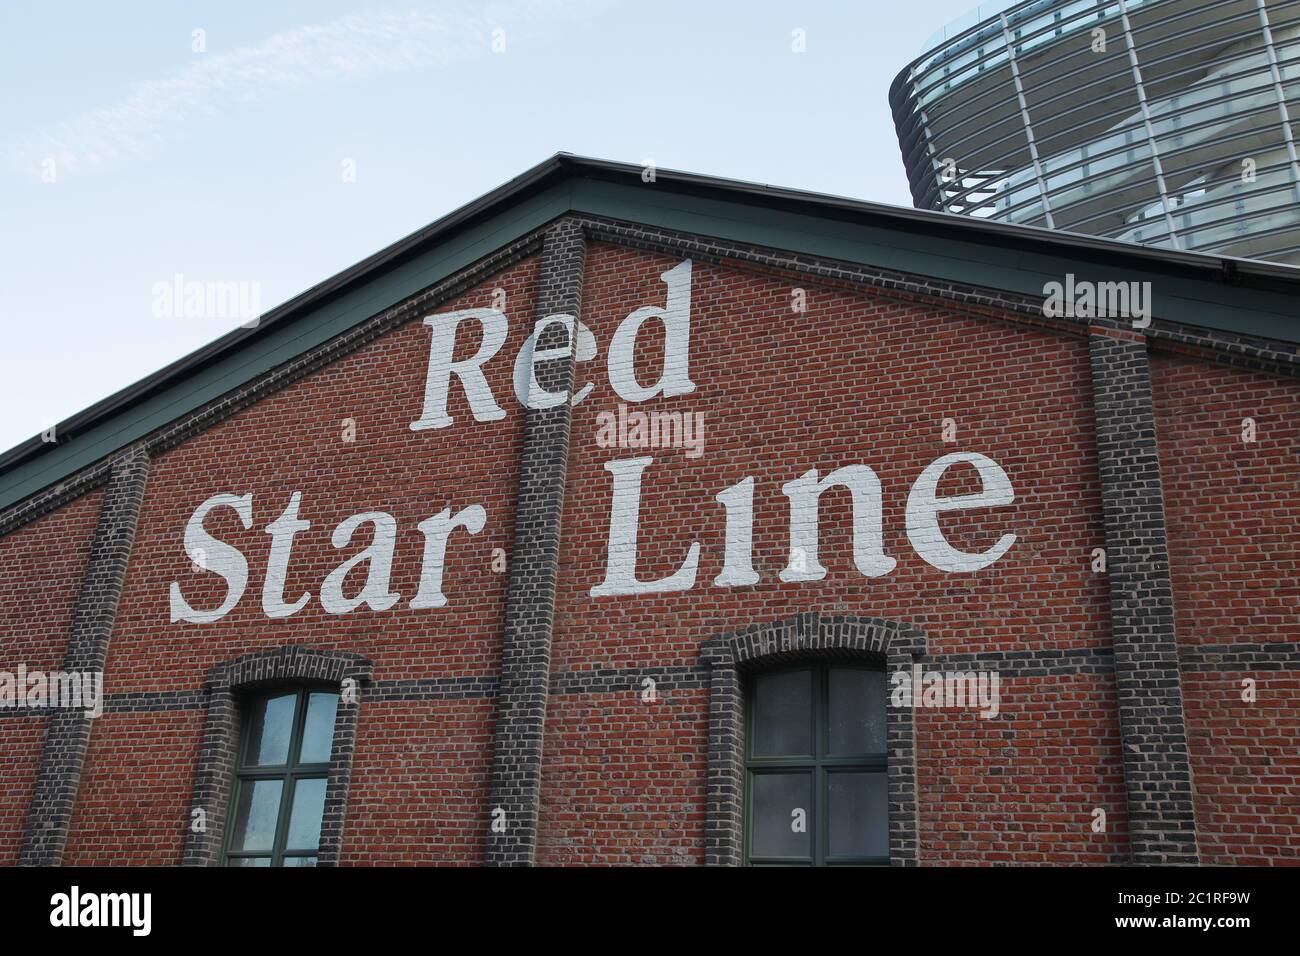 Red Star Line museum at Antwerp.The Red Star Line shipping line founded in 1871.Joint venture between the International Navigation Company of Philadelphia,which also ran the American Line, and the Société Anonyme de Navigation Belgo-Américaine of Antwerp, Belgium. The company's main ports of call were Antwerp in Belgium, Liverpool and Southampton UK and New York City and Philadelphia USA. Stock Photo